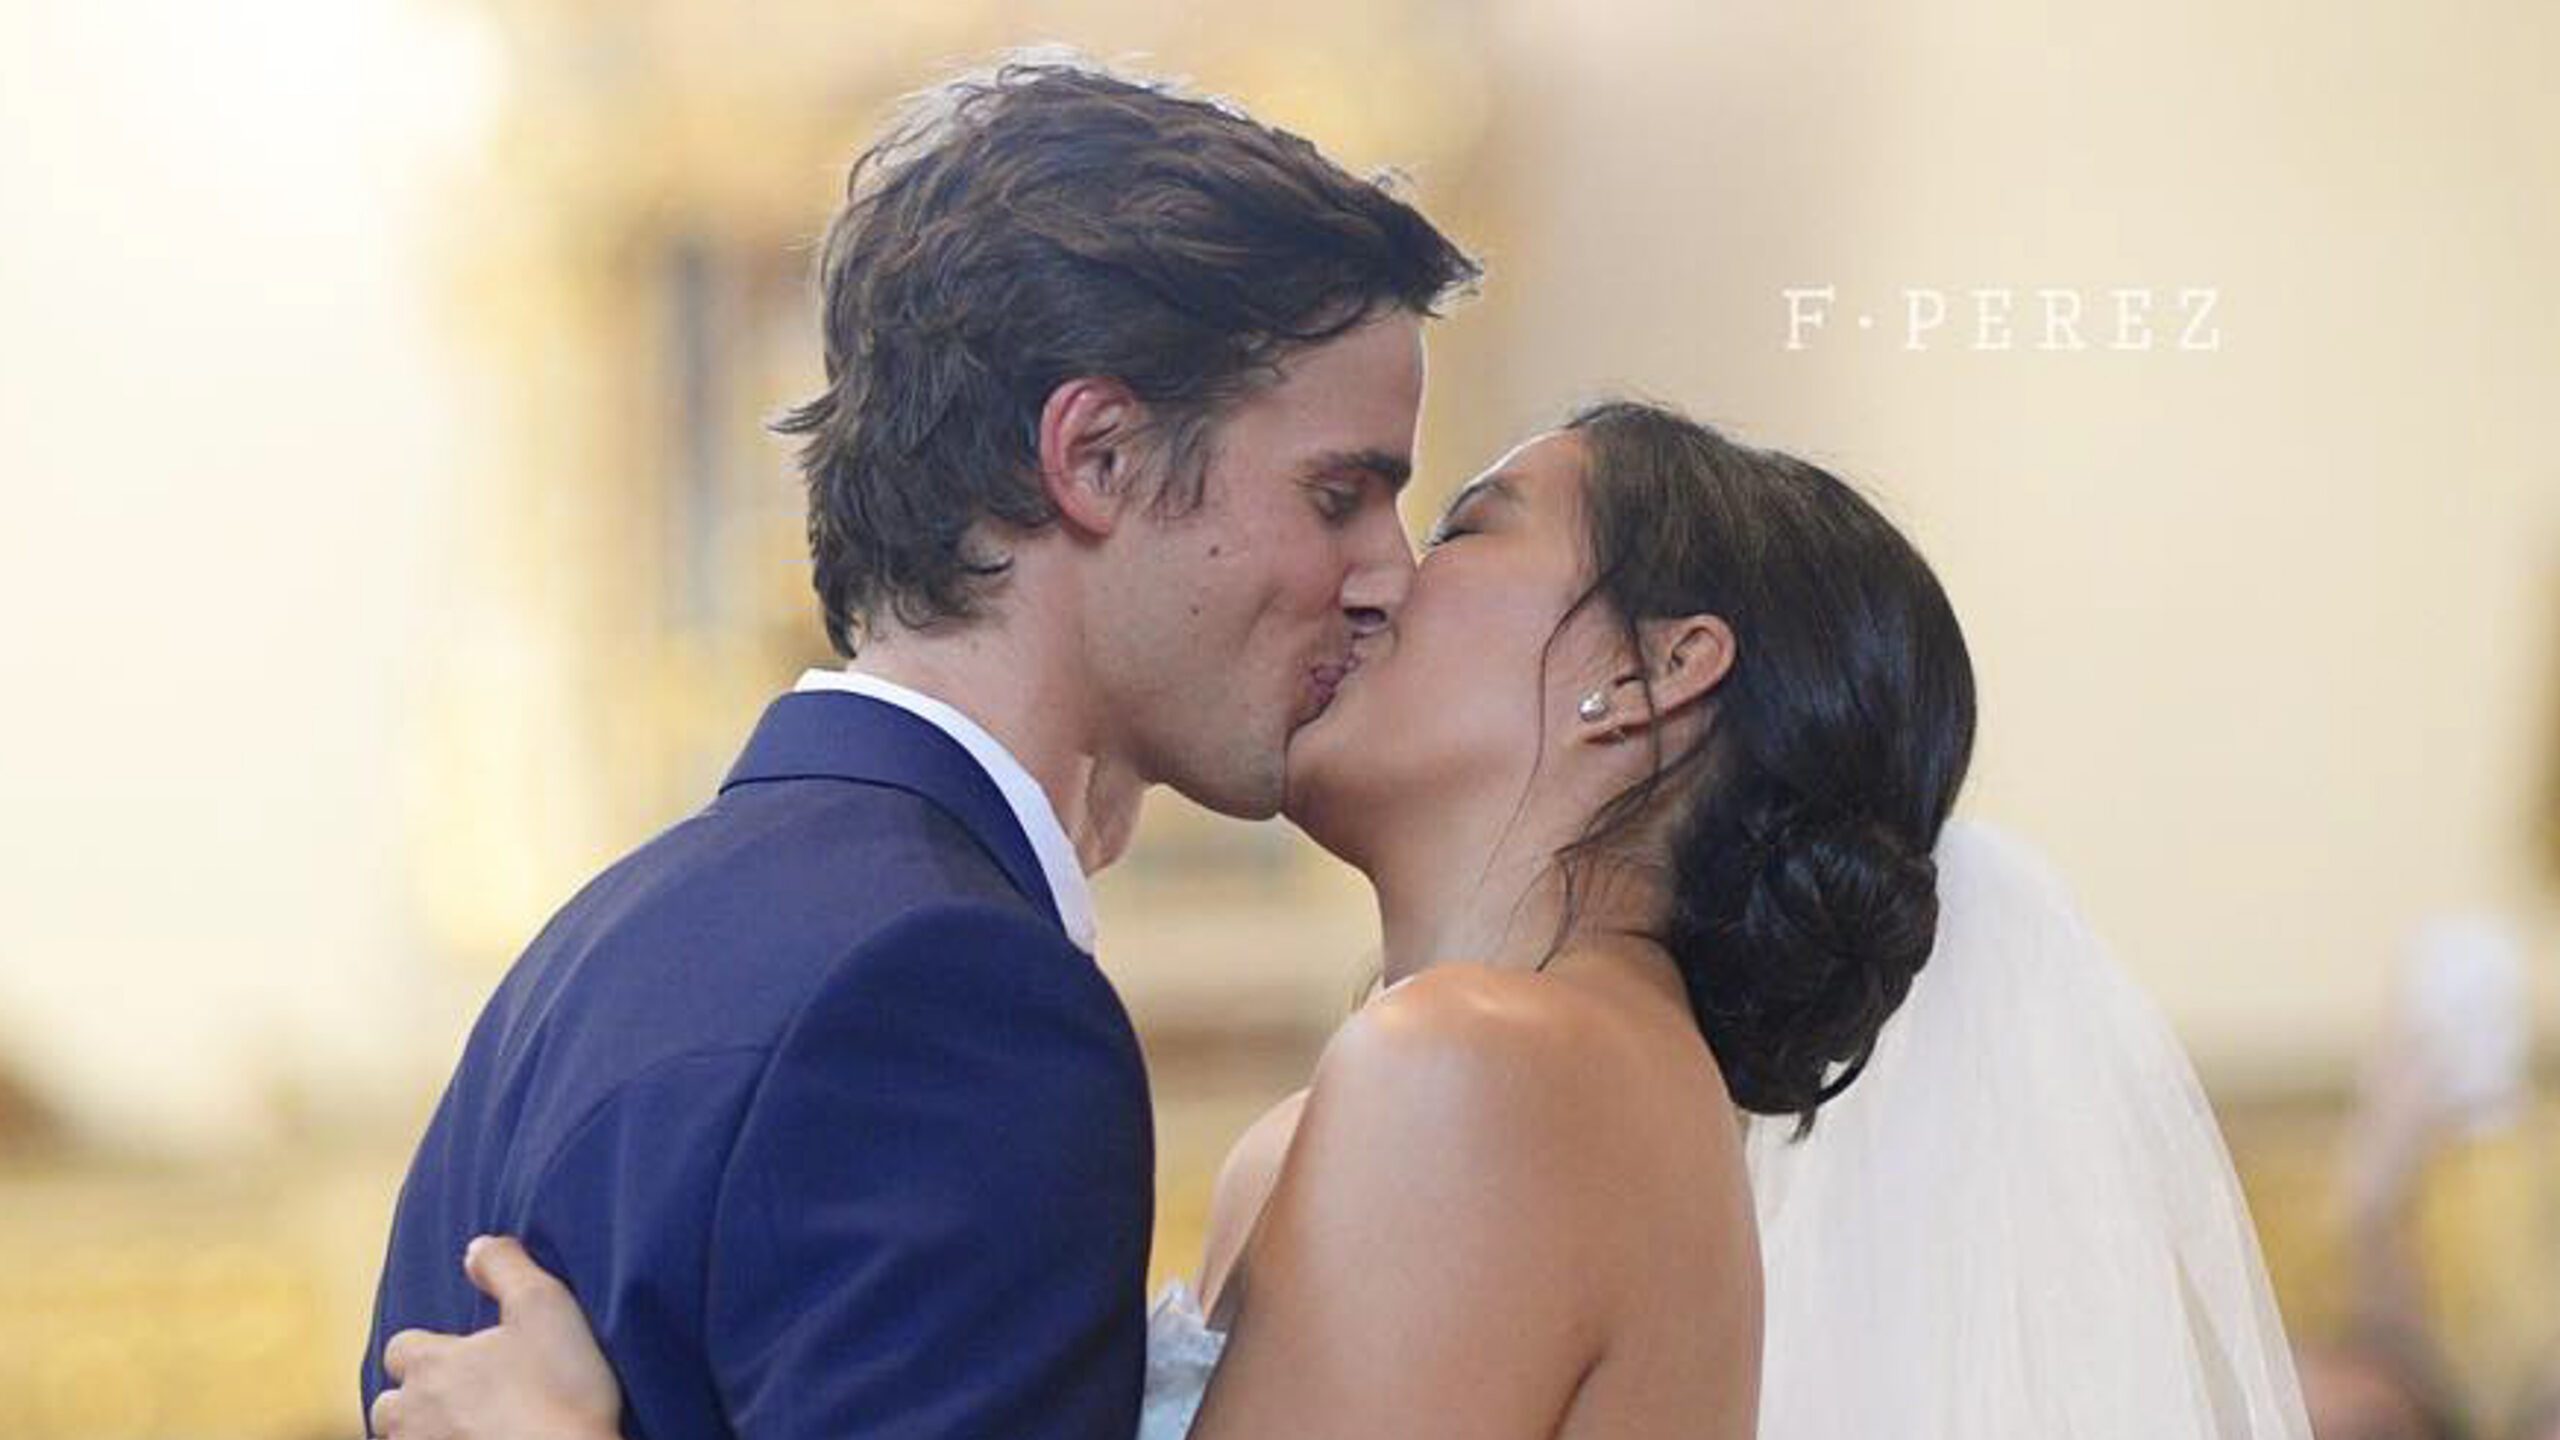 IN PHOTOS: Isabelle Daza, Adrien Semblat marry in Italy